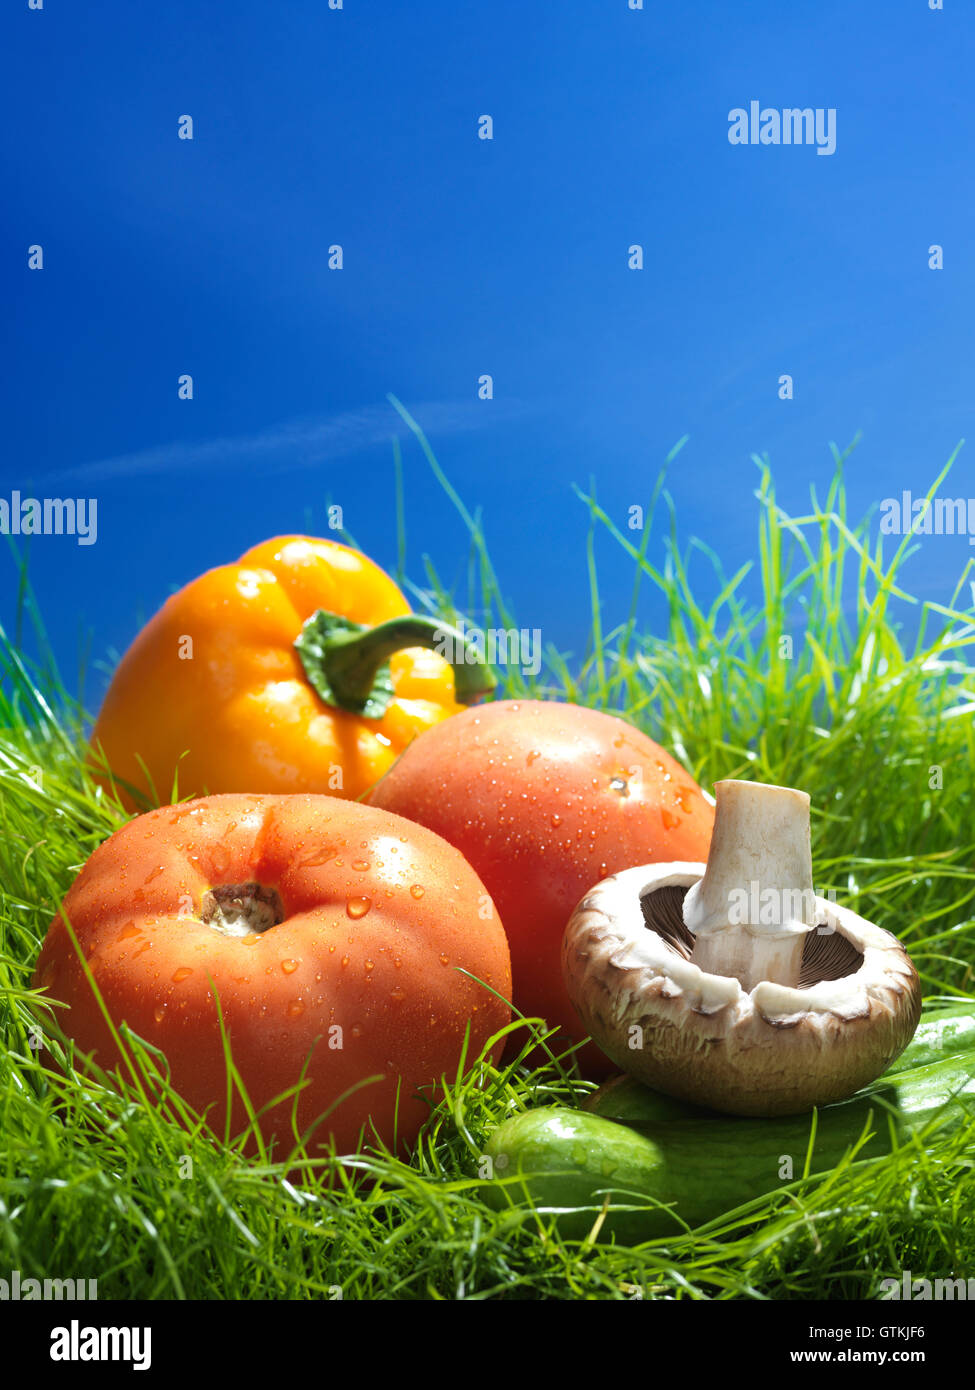 Colorful fresh vegetables, field tomatoes, cremini mushrooms, pepper and cucumbers in green grass under blue sky artistic food s Stock Photo